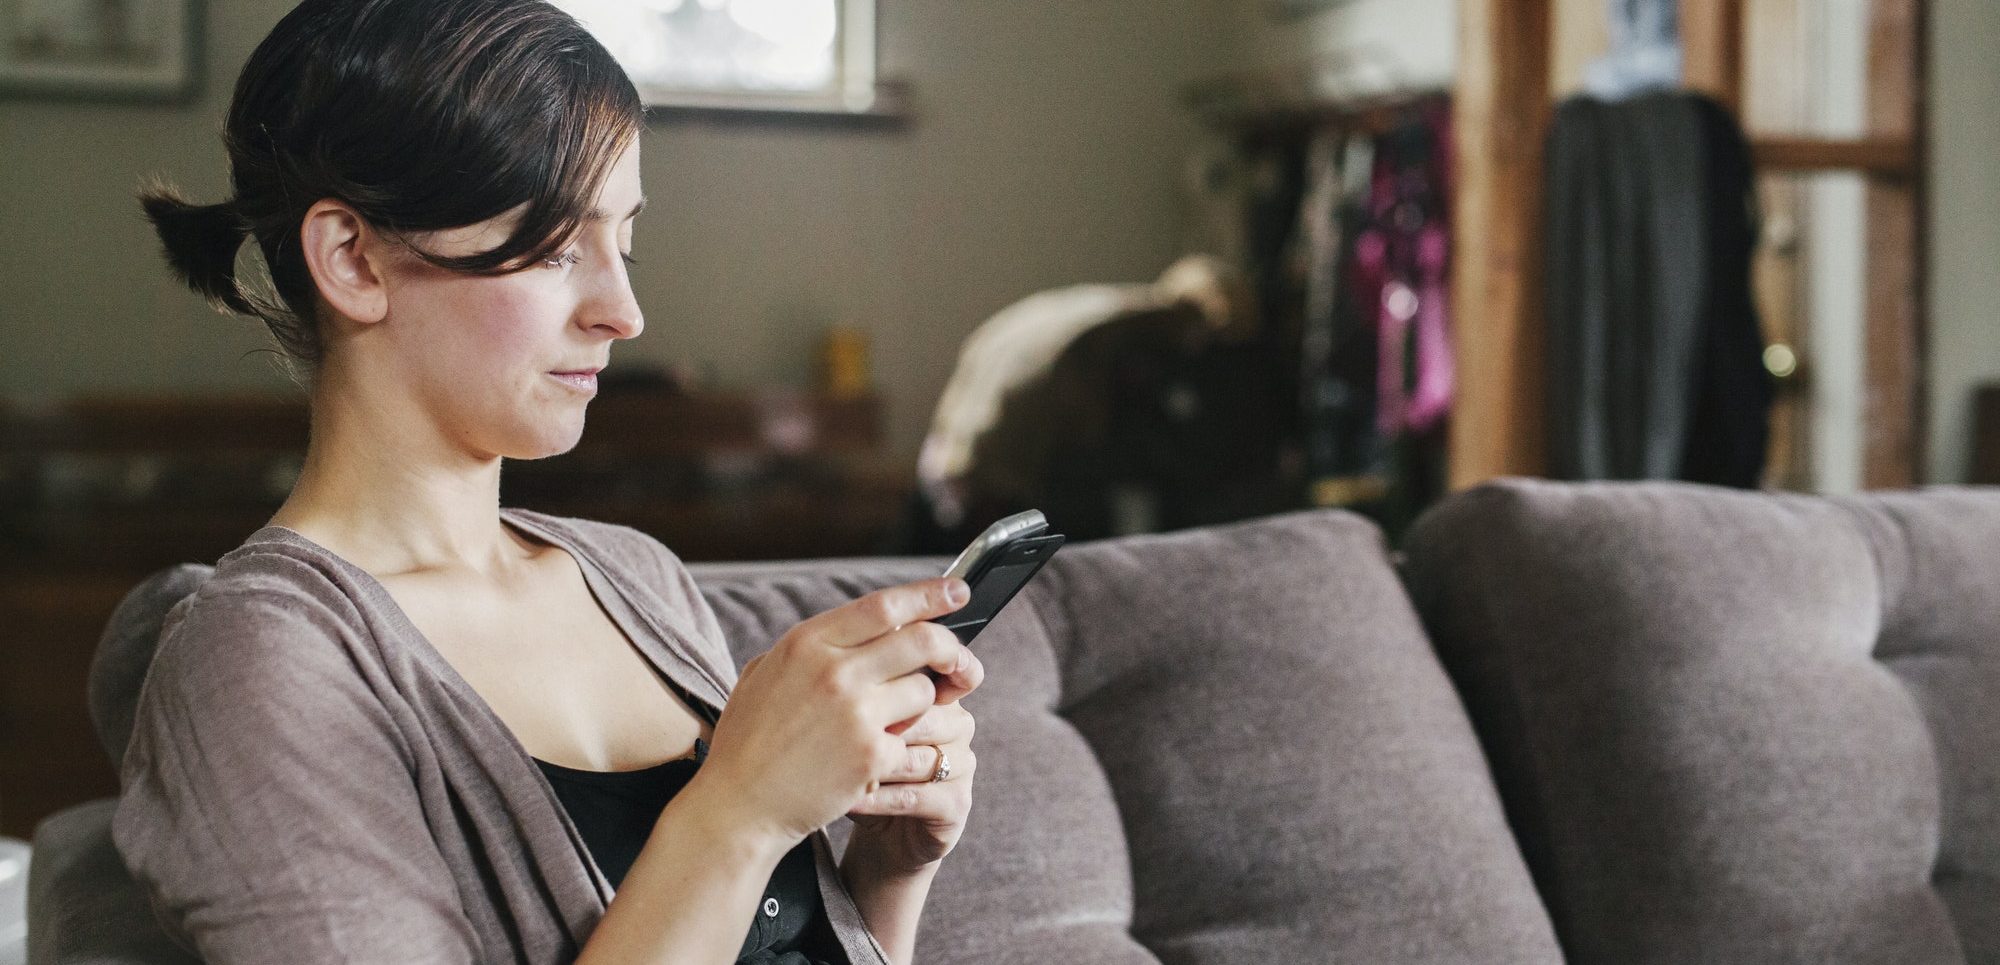 A woman on the sofa using her smart phone to text.